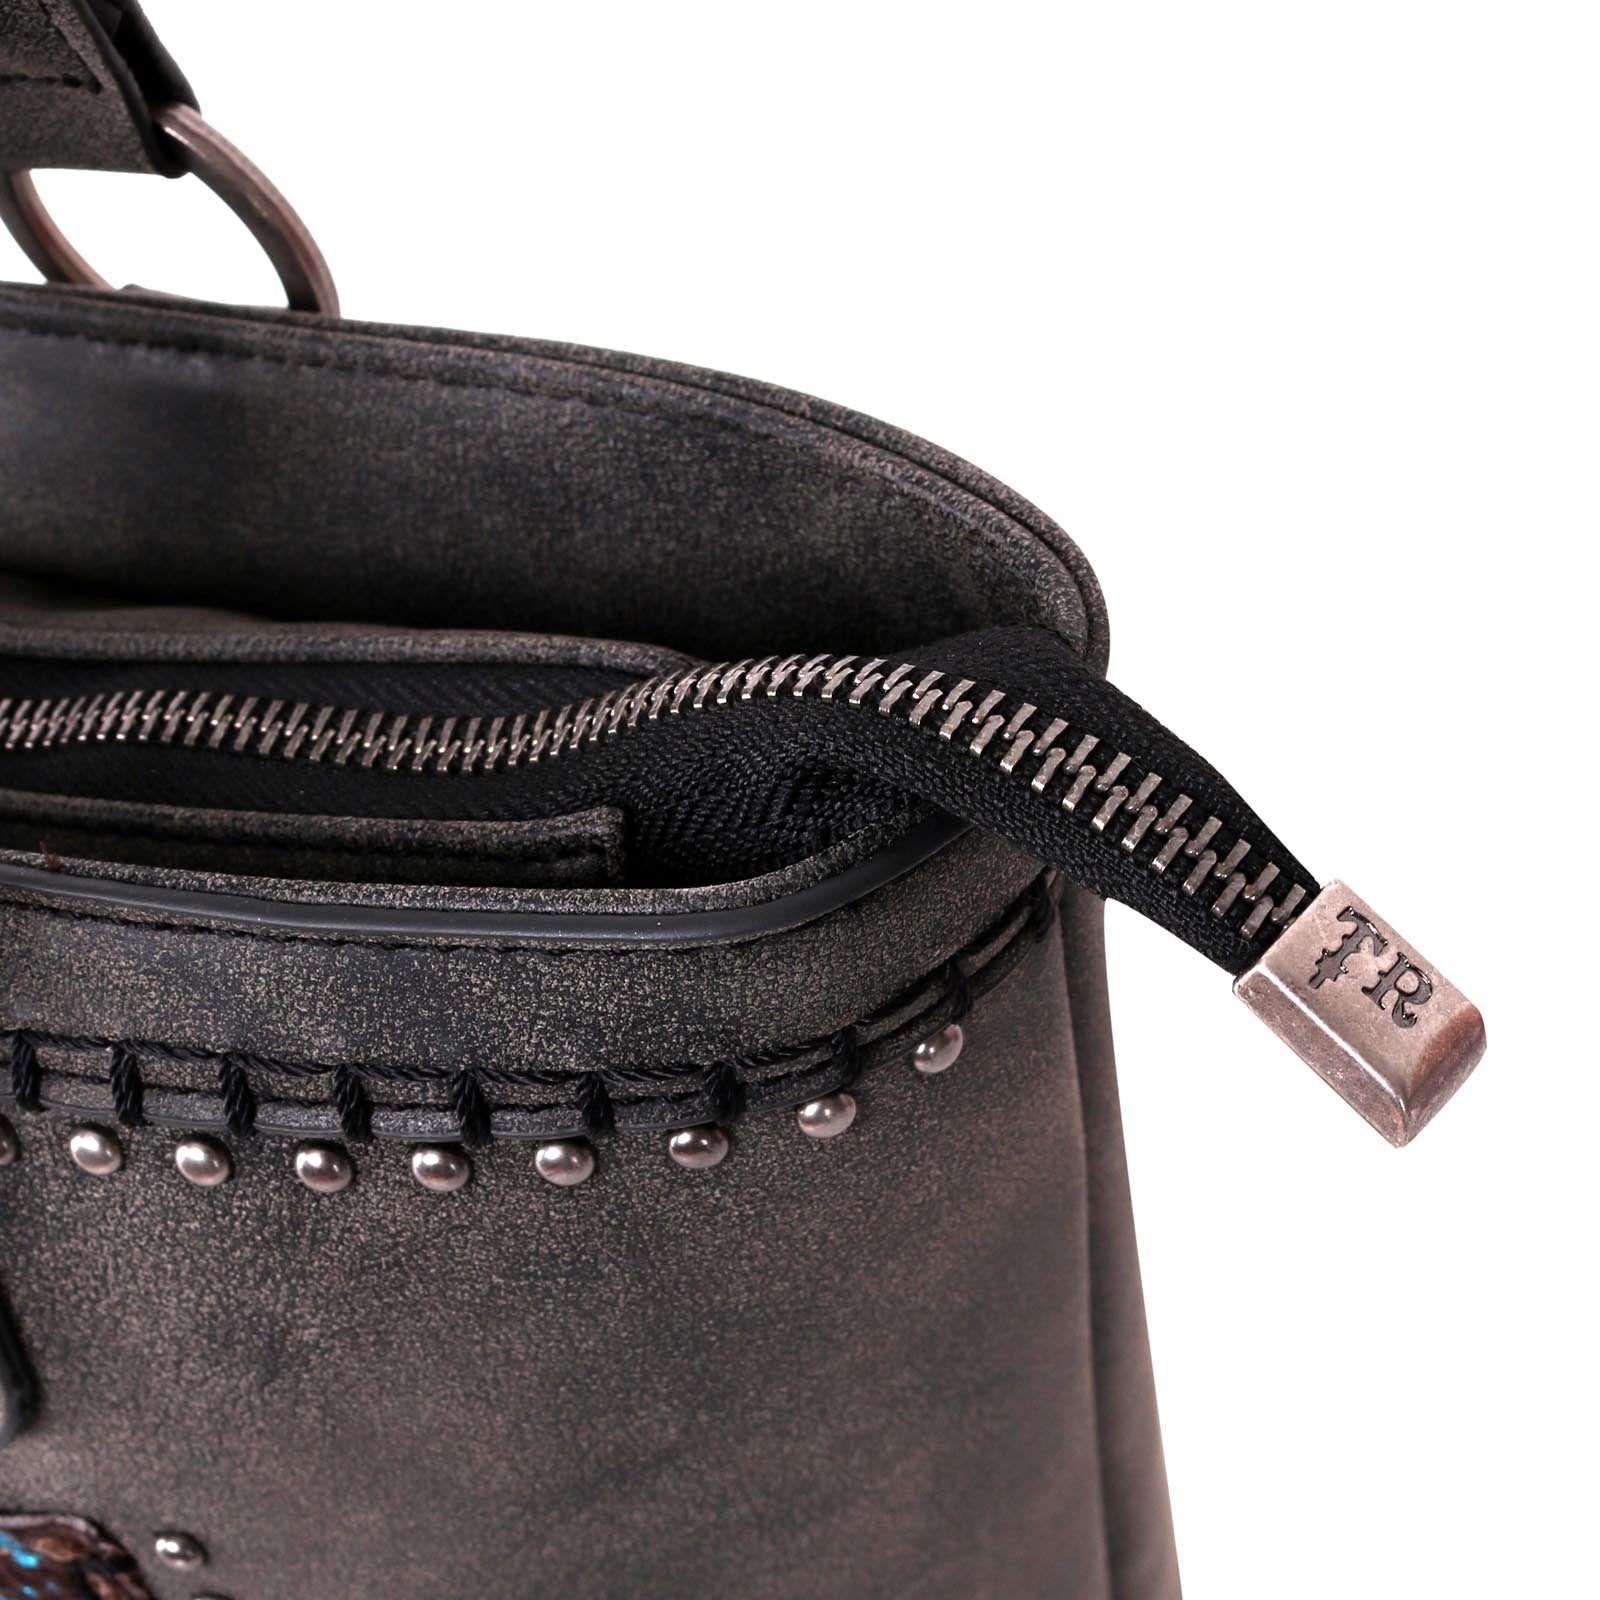 Trinity Ranch Hair-On Leather Concealed Carry Tote - Montana West World